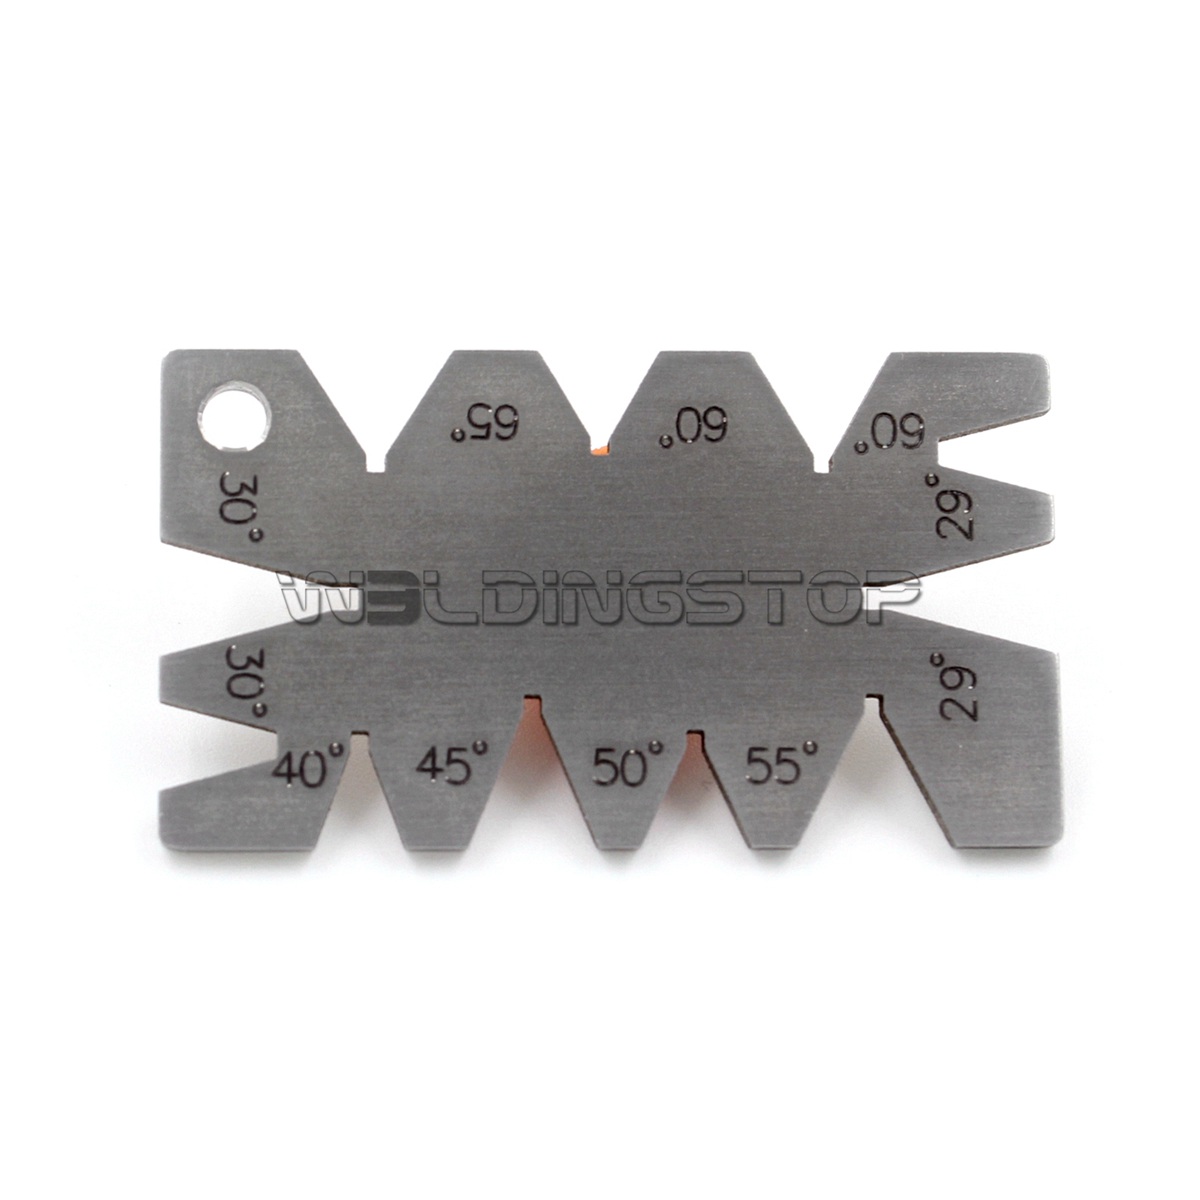 Stainless Steel Screw thread Cutting angle gage Gauge Measuring Tool 